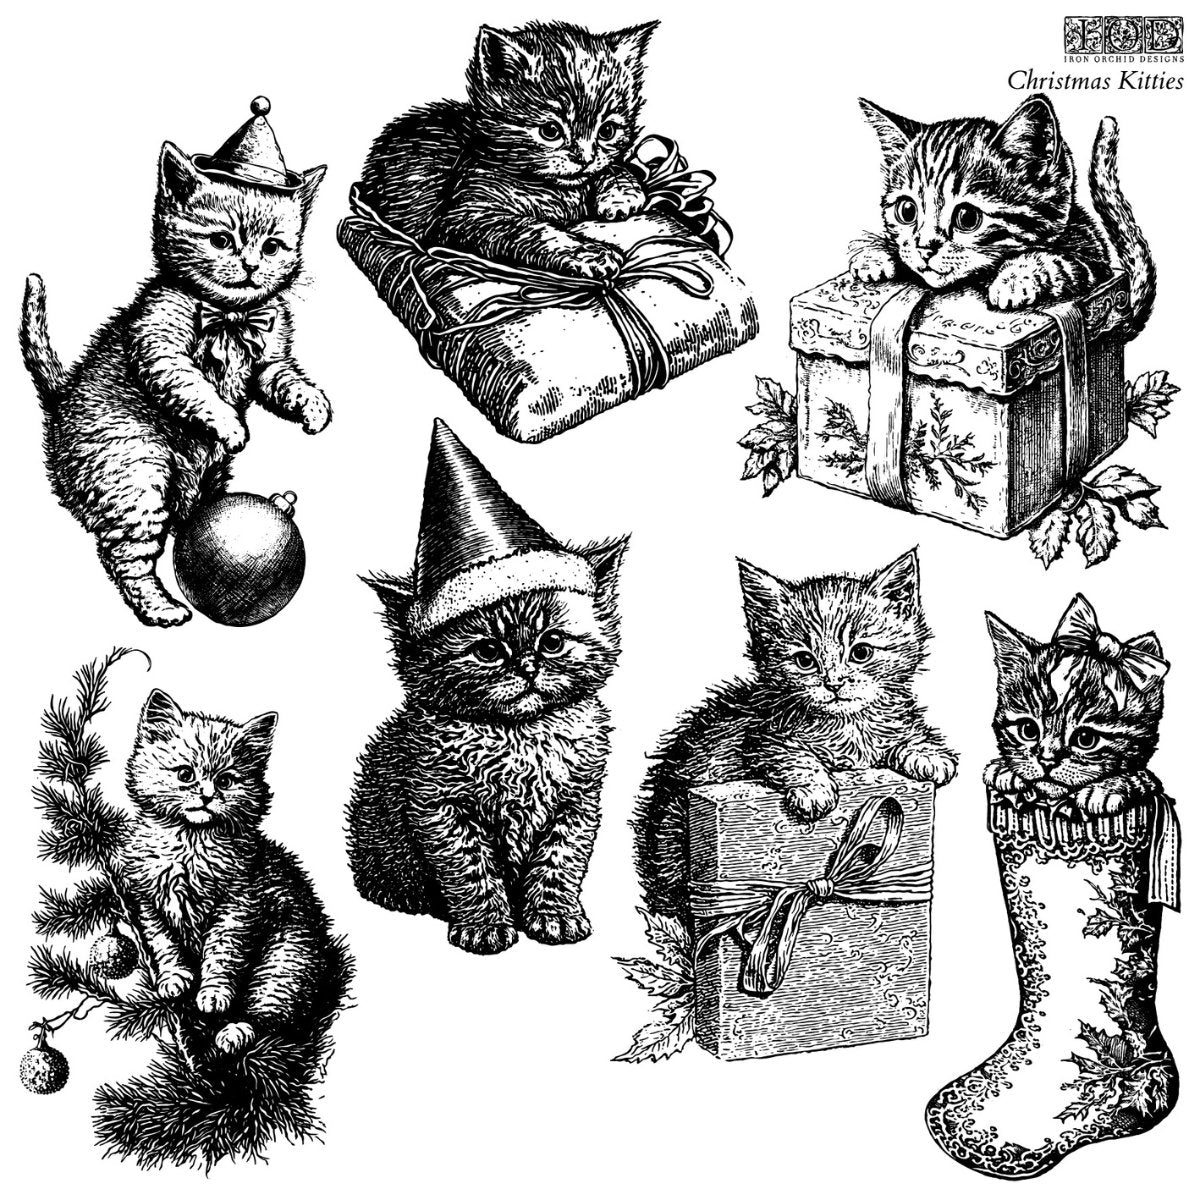 Iron Orchid Designs - Christmas Kitties Decor Stamp - Rustic River Home